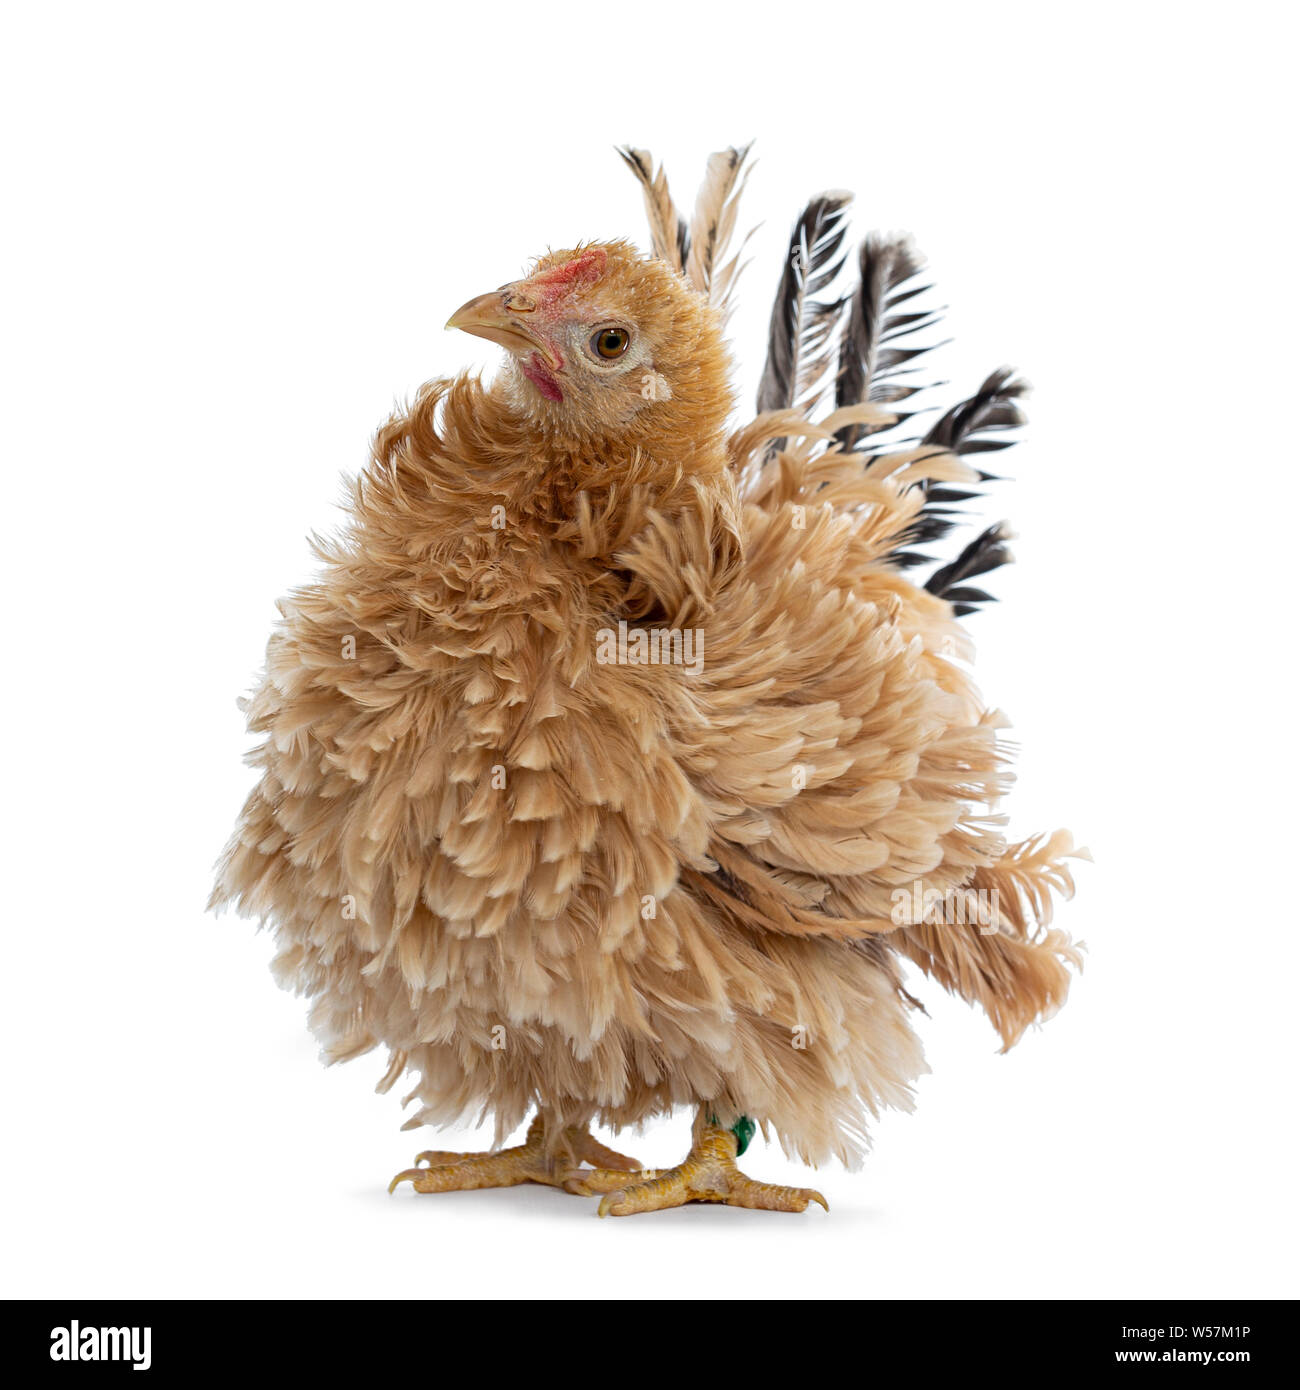 Pretty young Japanese Bantam / Chabo chicken, standing facing front. Head tilted curious to camera. Isolated on white background. Stock Photo